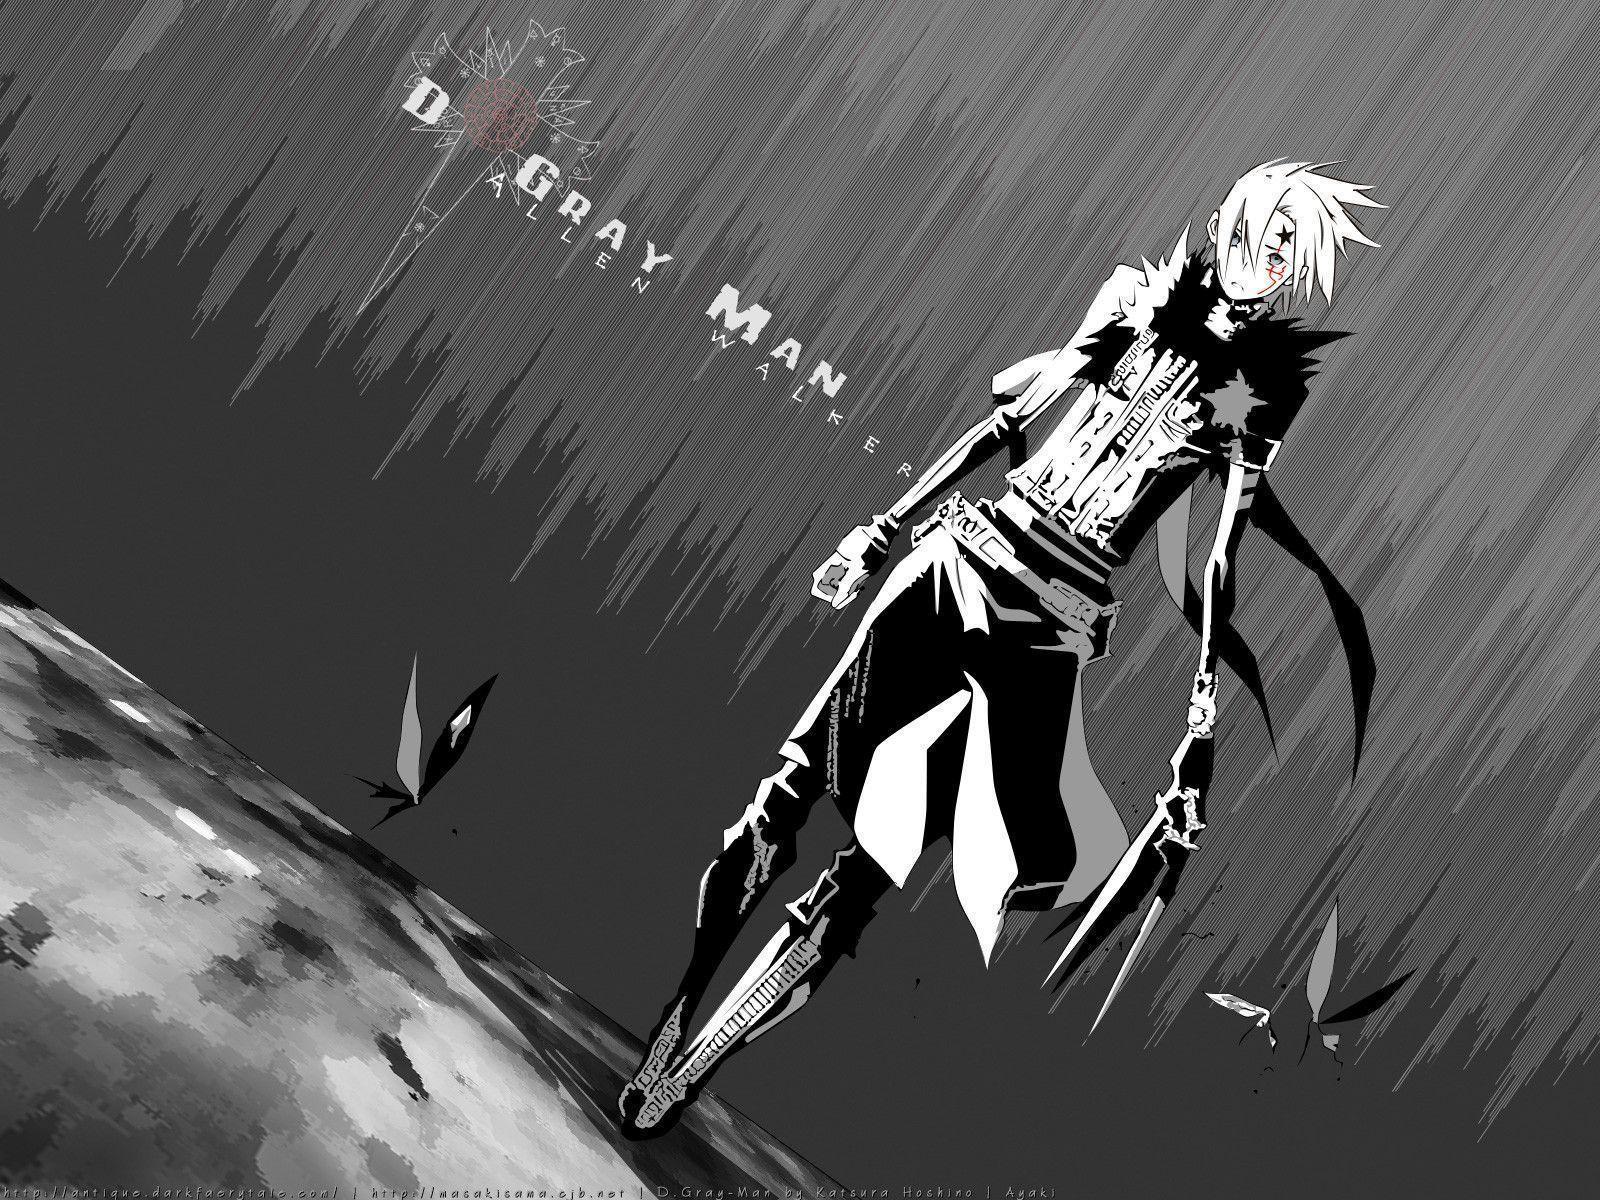 160+ D.Gray-man HD Wallpapers and Backgrounds